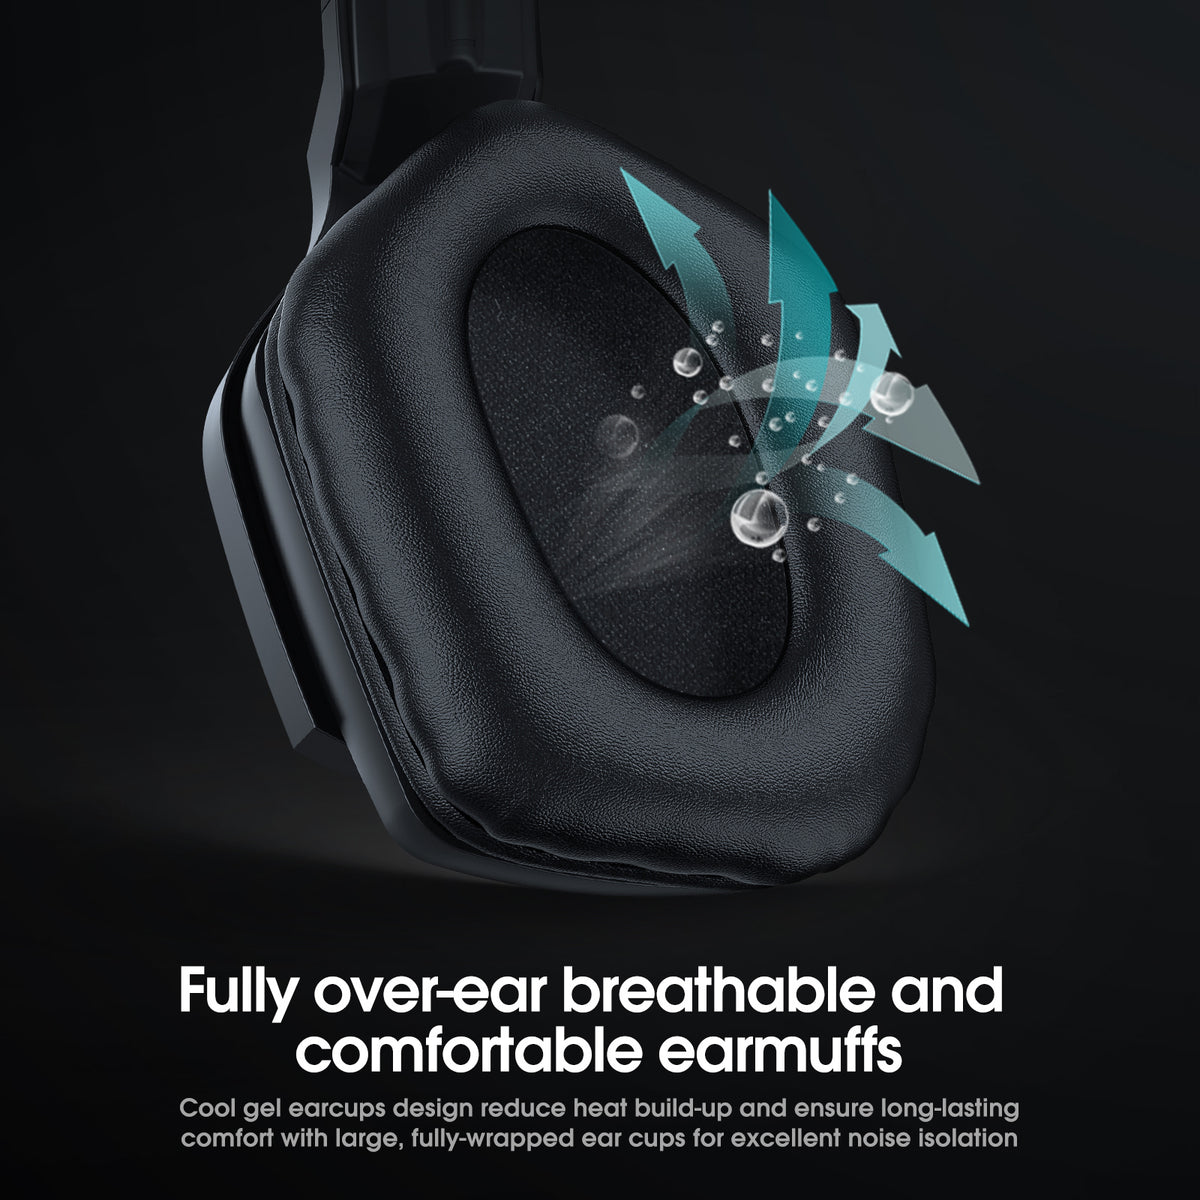 Fully over-ear breathable and comfortable earmuffs